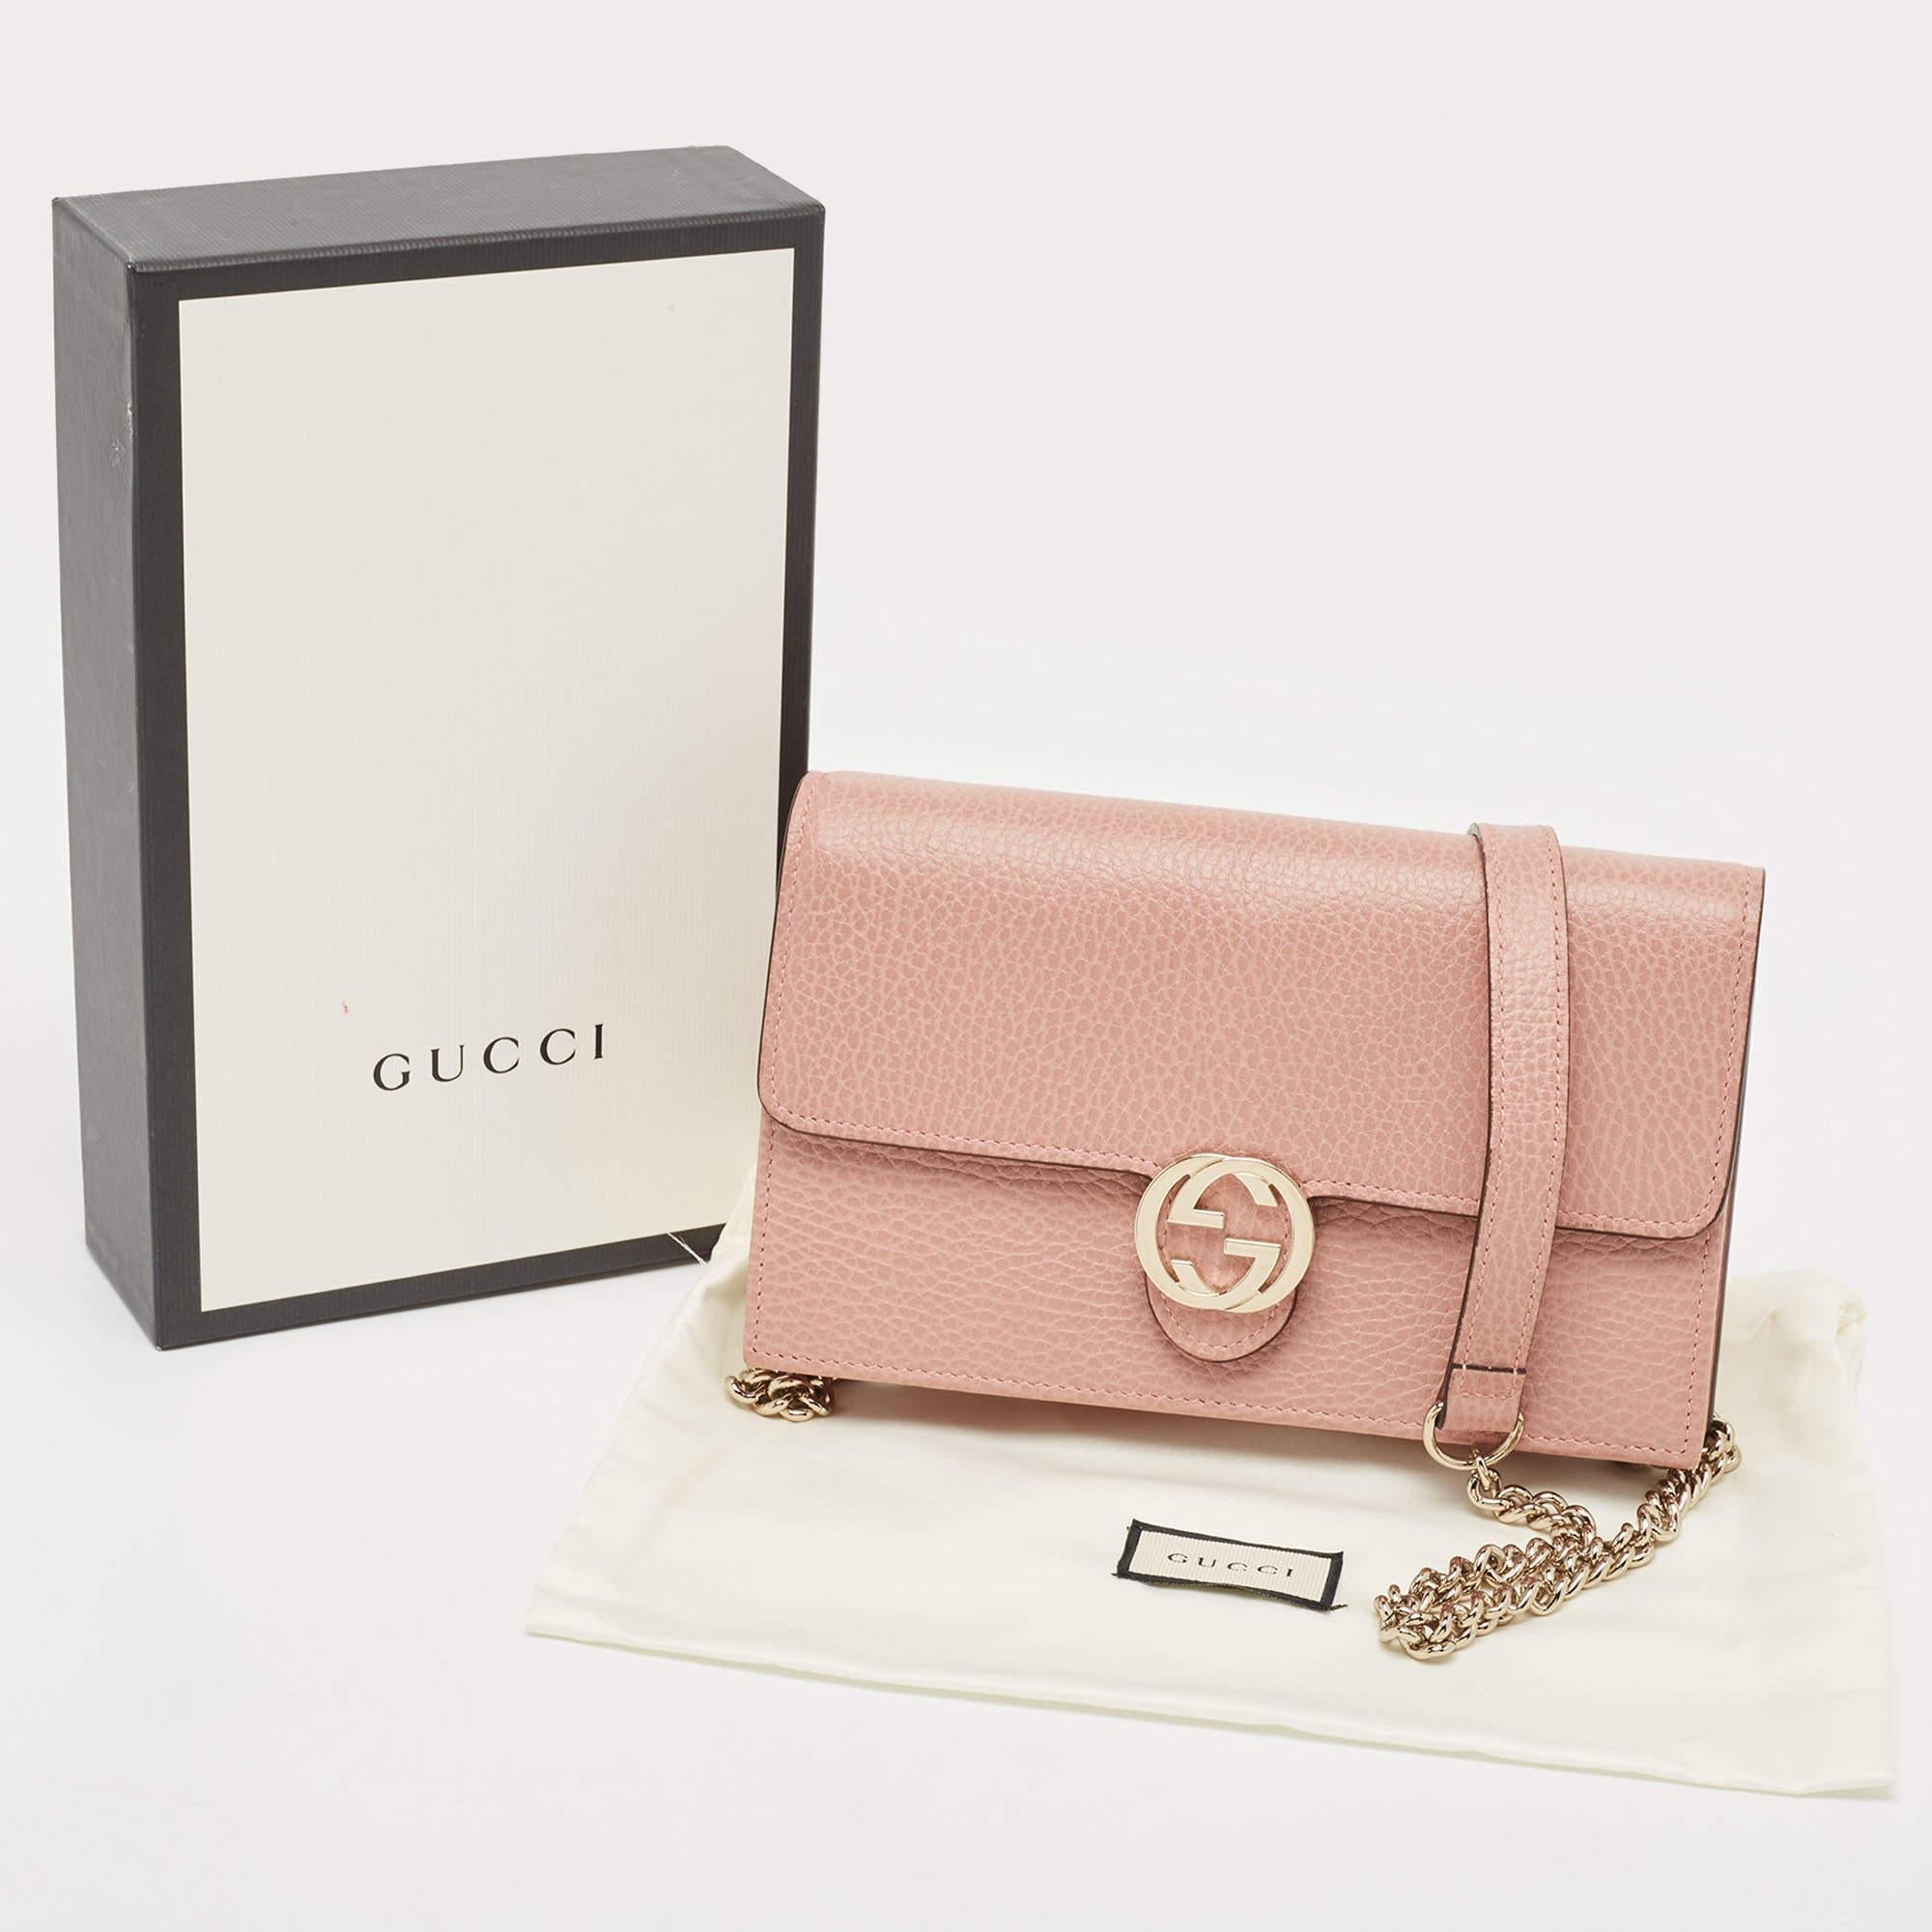 Gucci Dusty Pink Leather Interlocking G Wallet on Chain In Good Condition For Sale In Dubai, Al Qouz 2